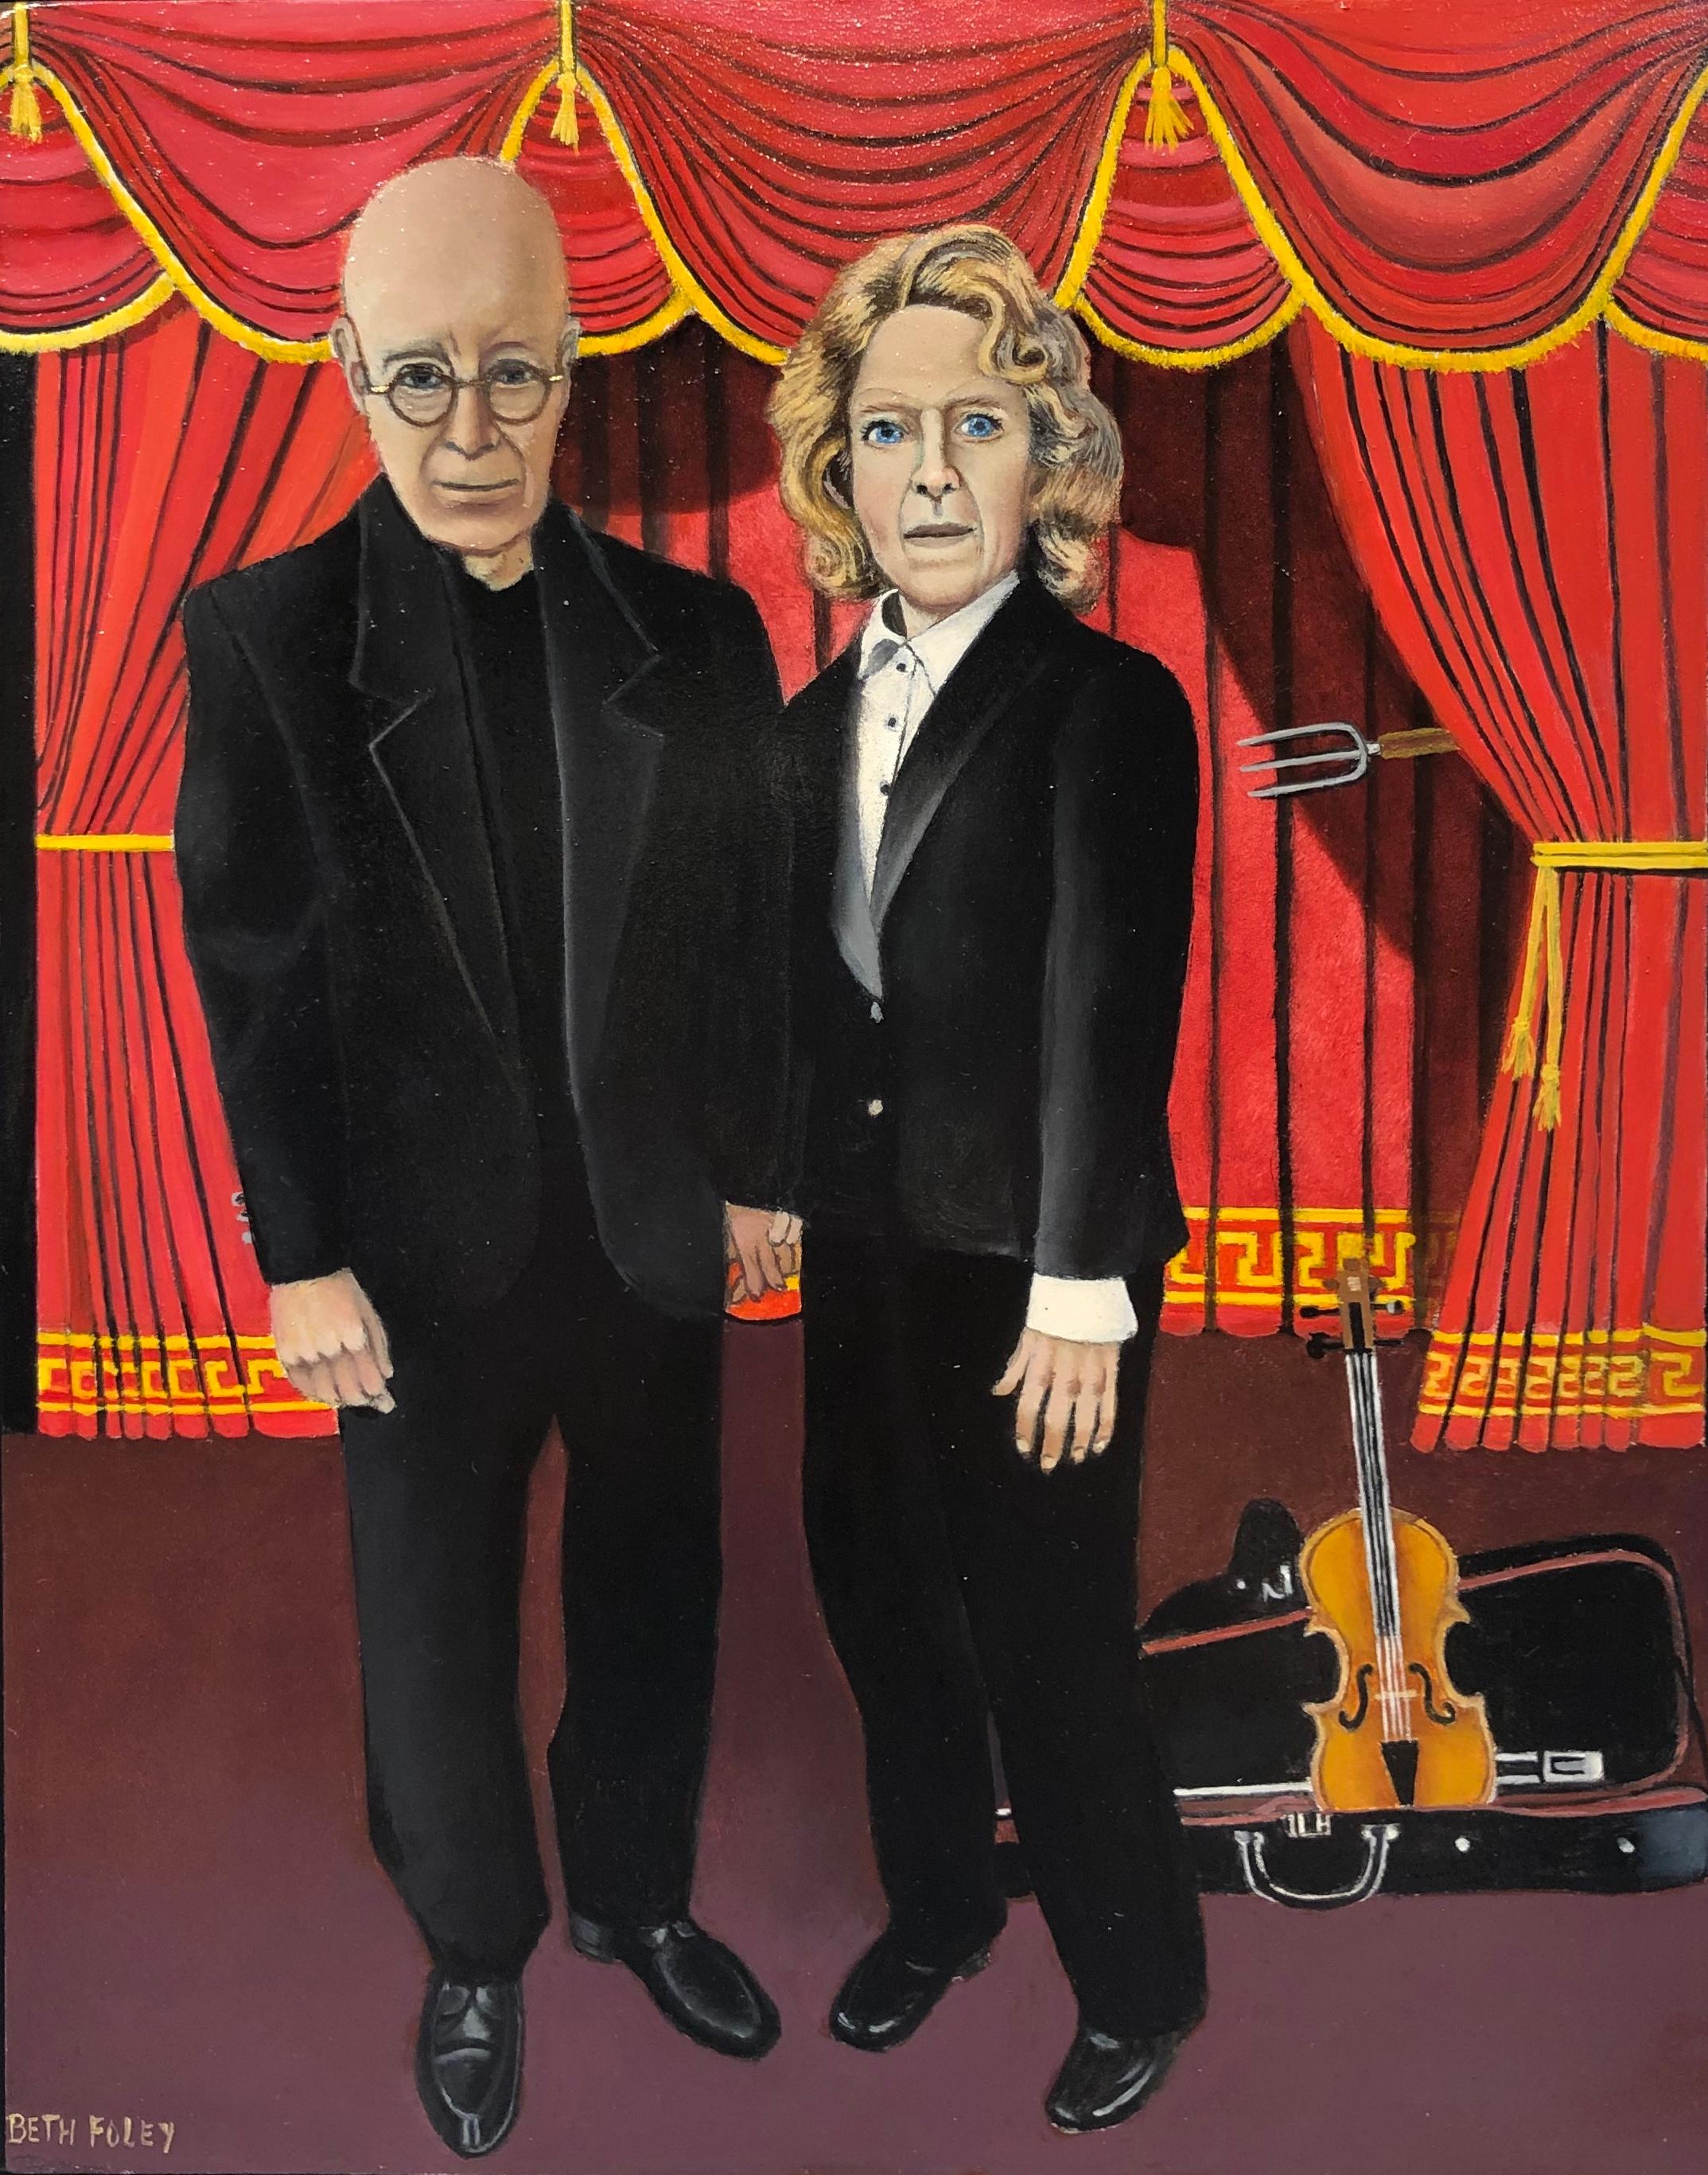 Beth Foley Figurative Painting - Highbrow American Gothic, Homage to Grant Wood, Original Oil on Panel, Framed